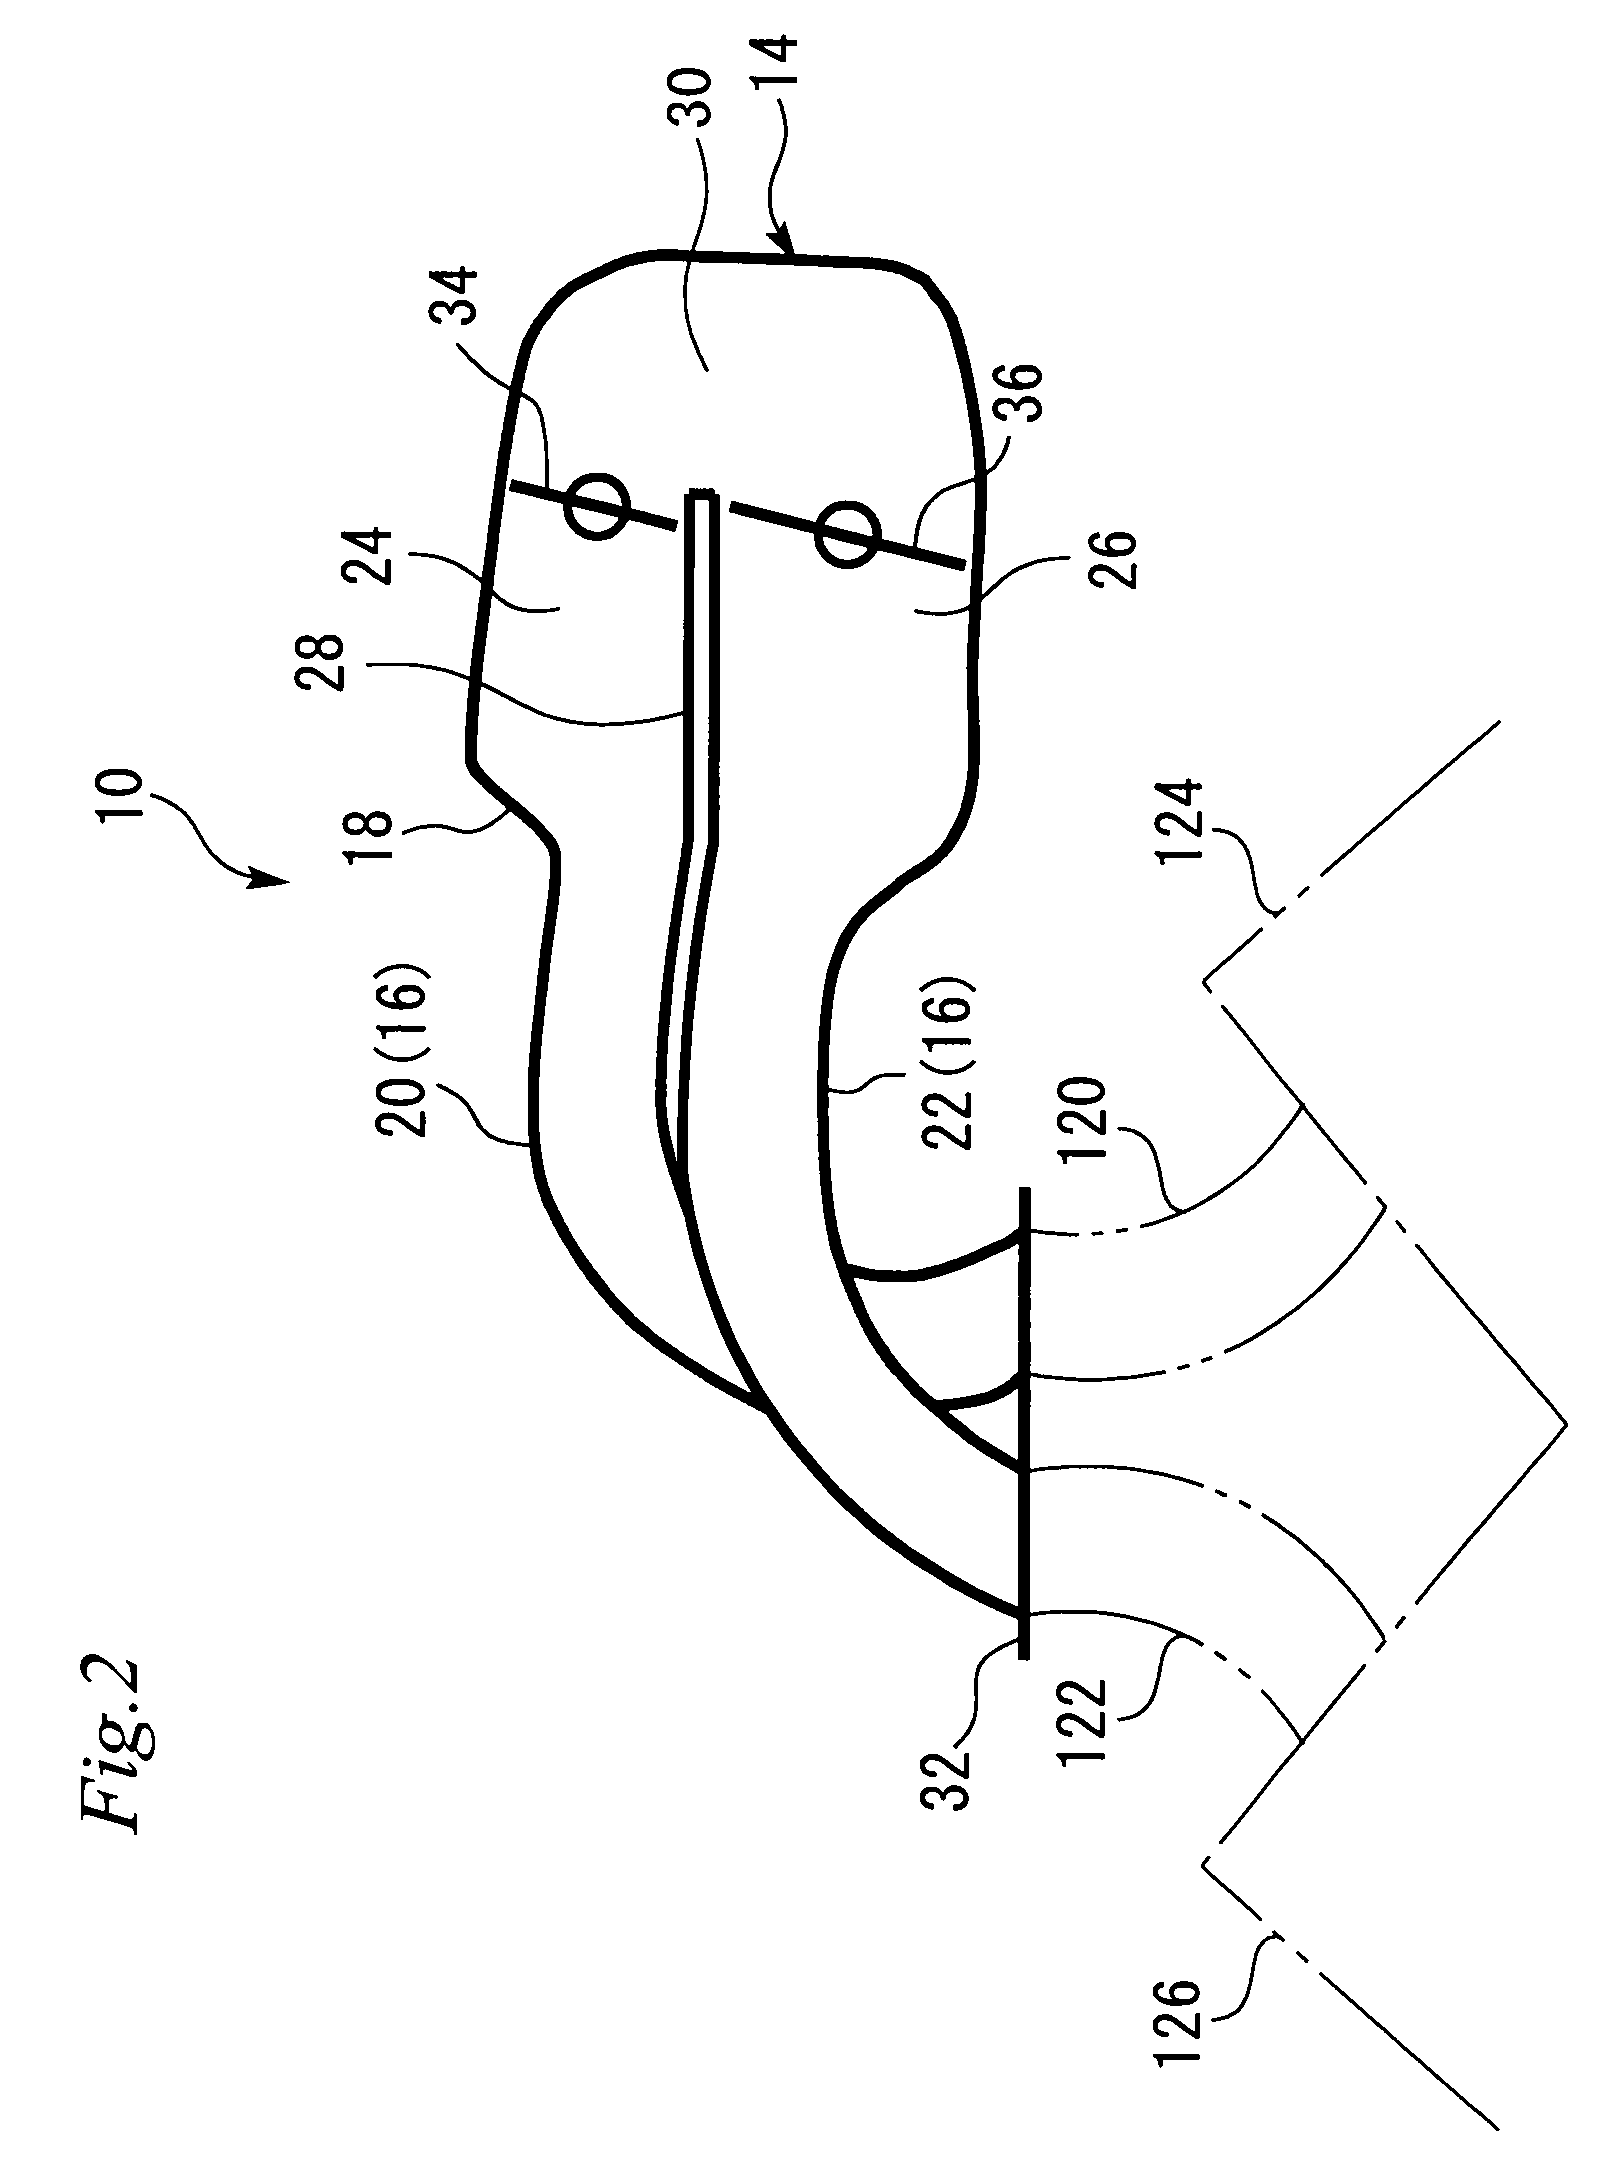 Air intake device for multi-cylinder internal combustion engine